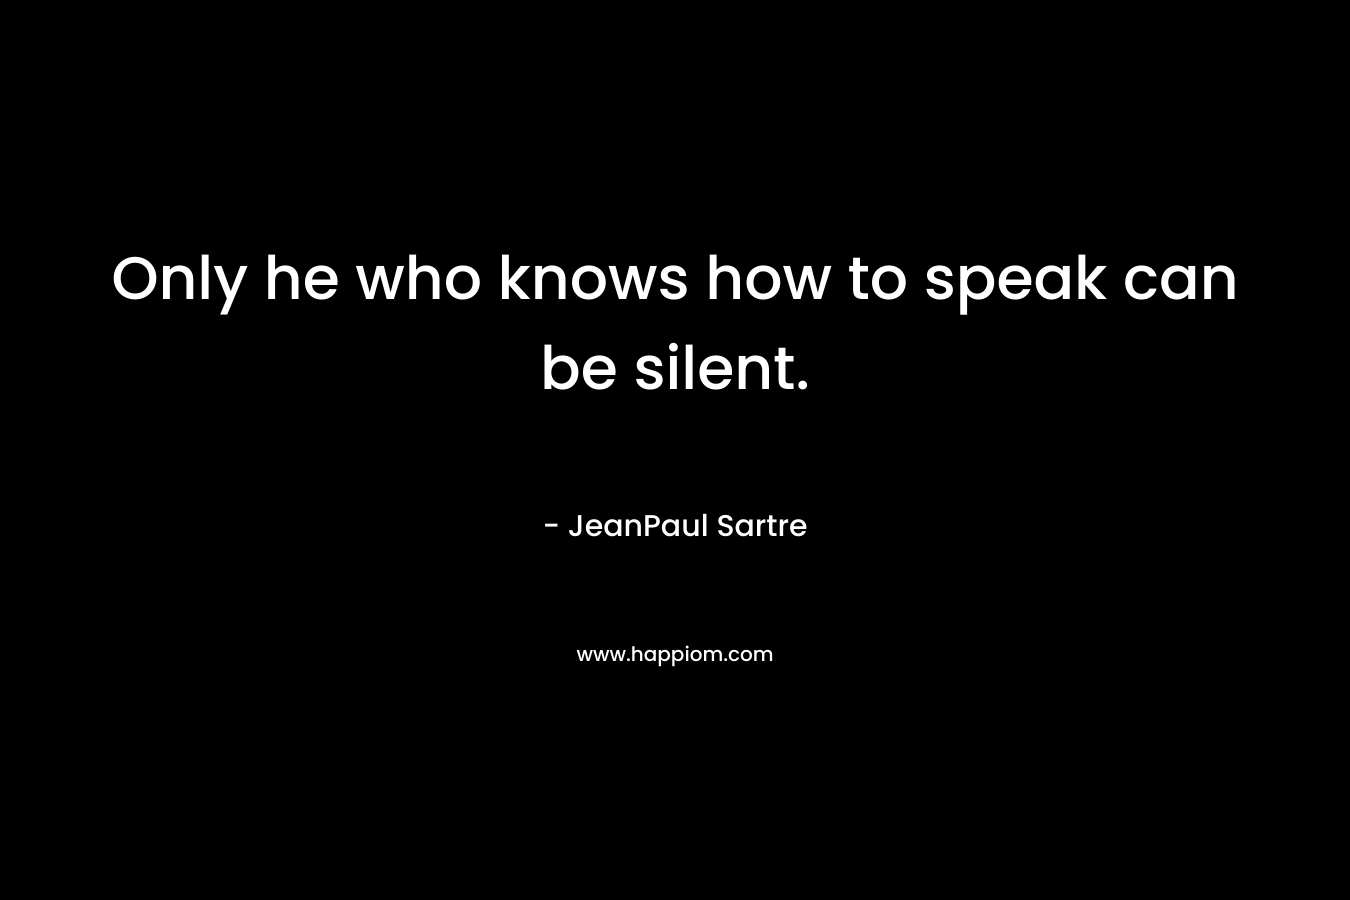 Only he who knows how to speak can be silent.